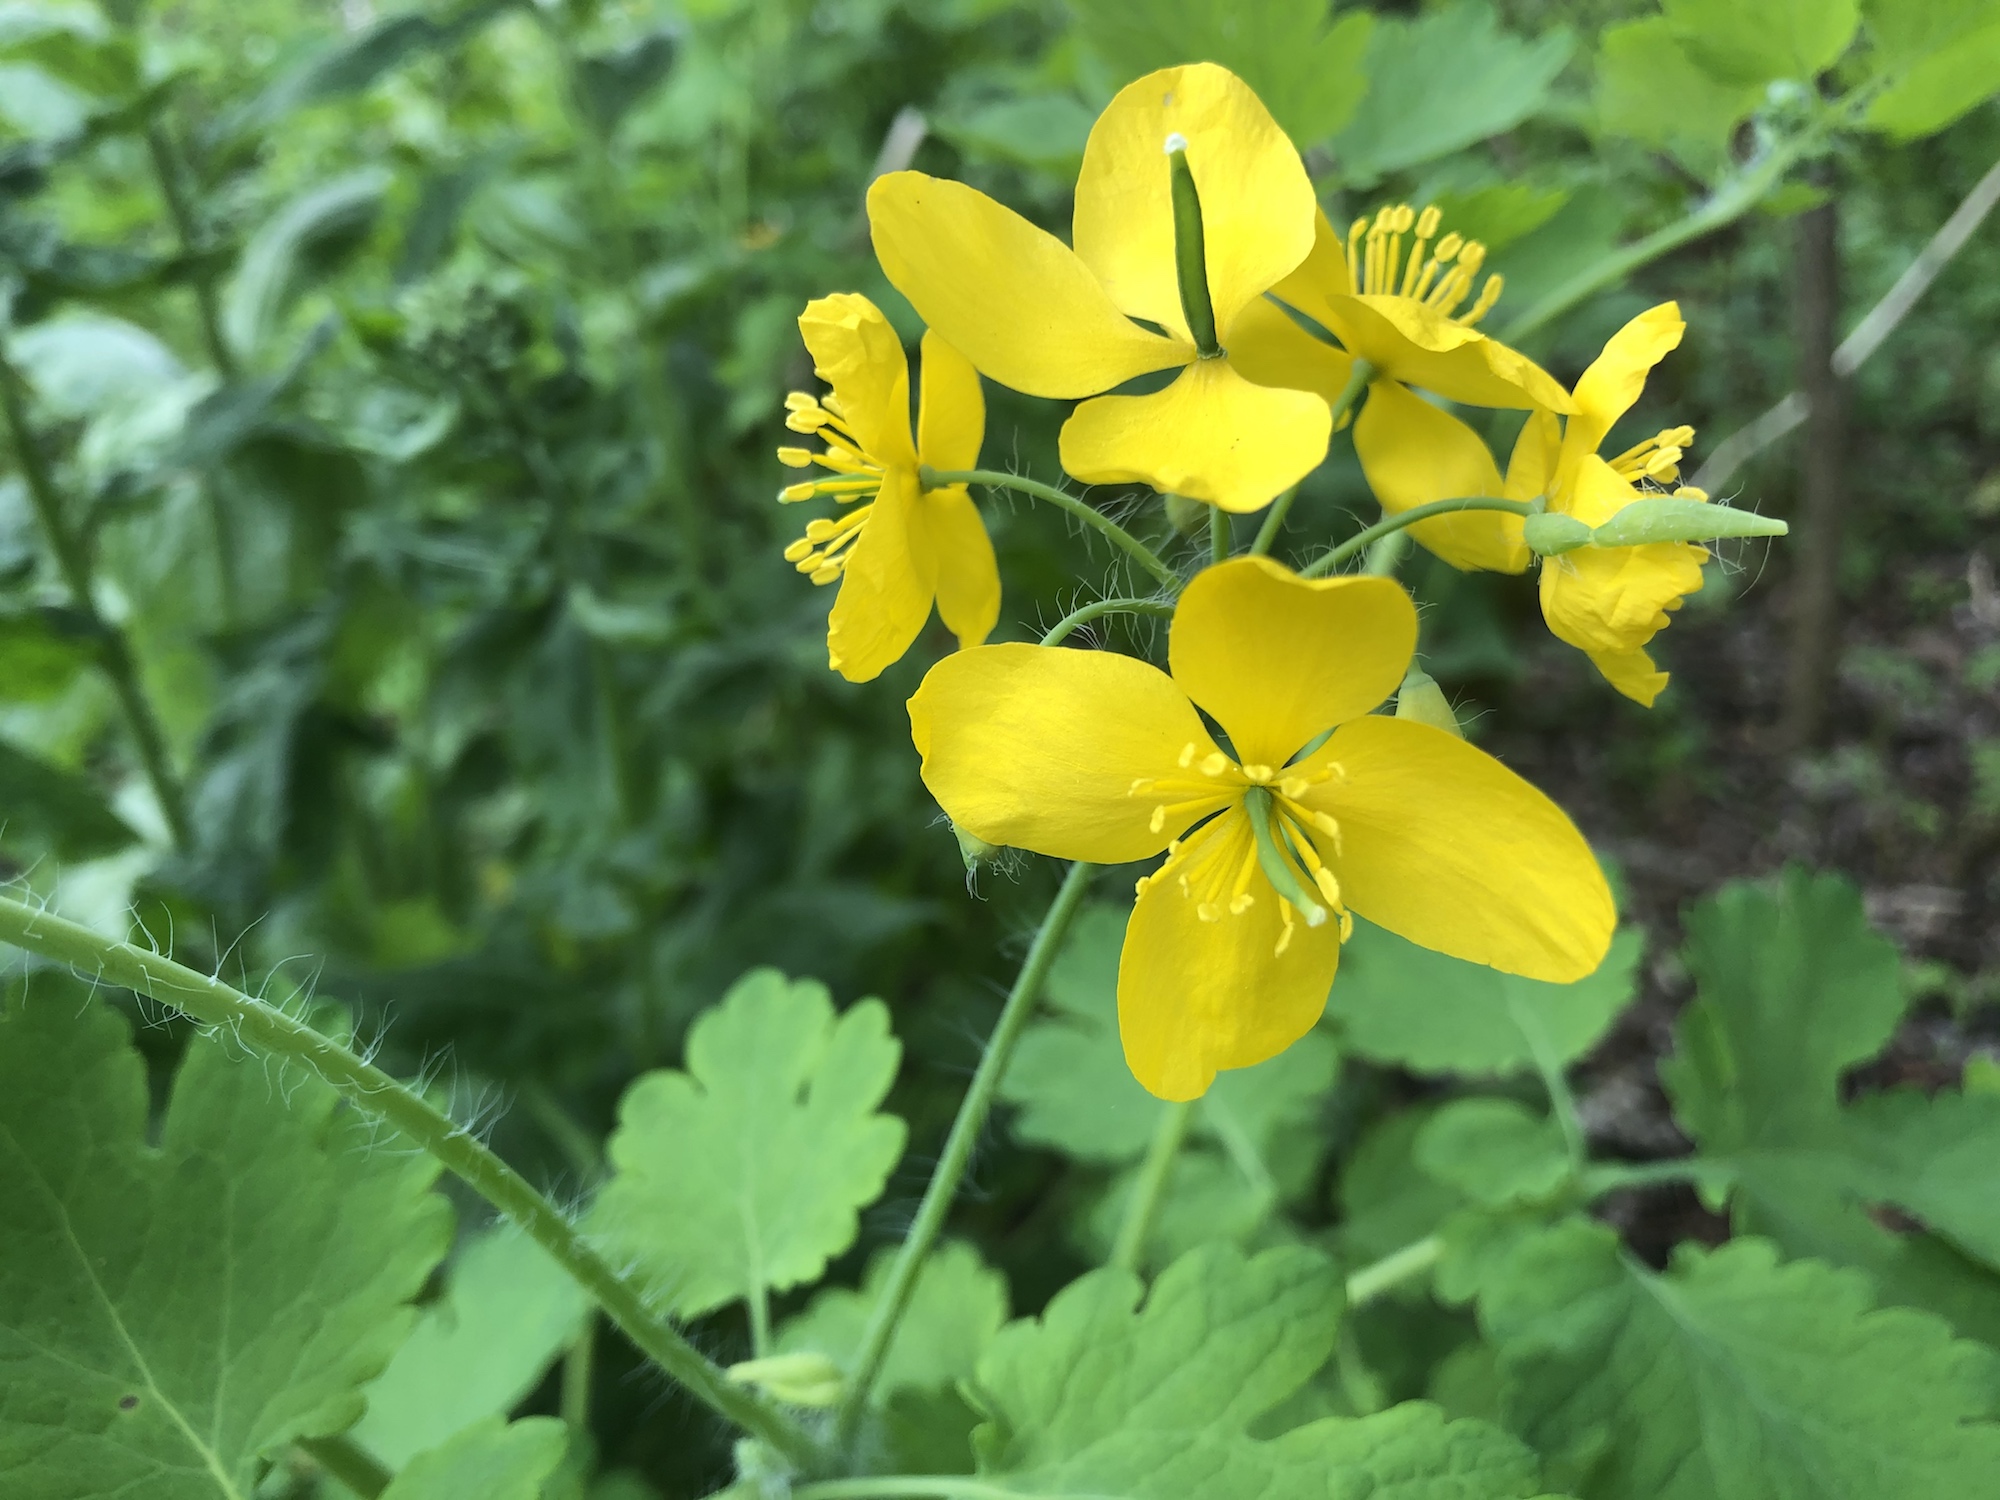 Greater Celandine by Duck Pond in Madison, Wisconsin on May 21, 2020.